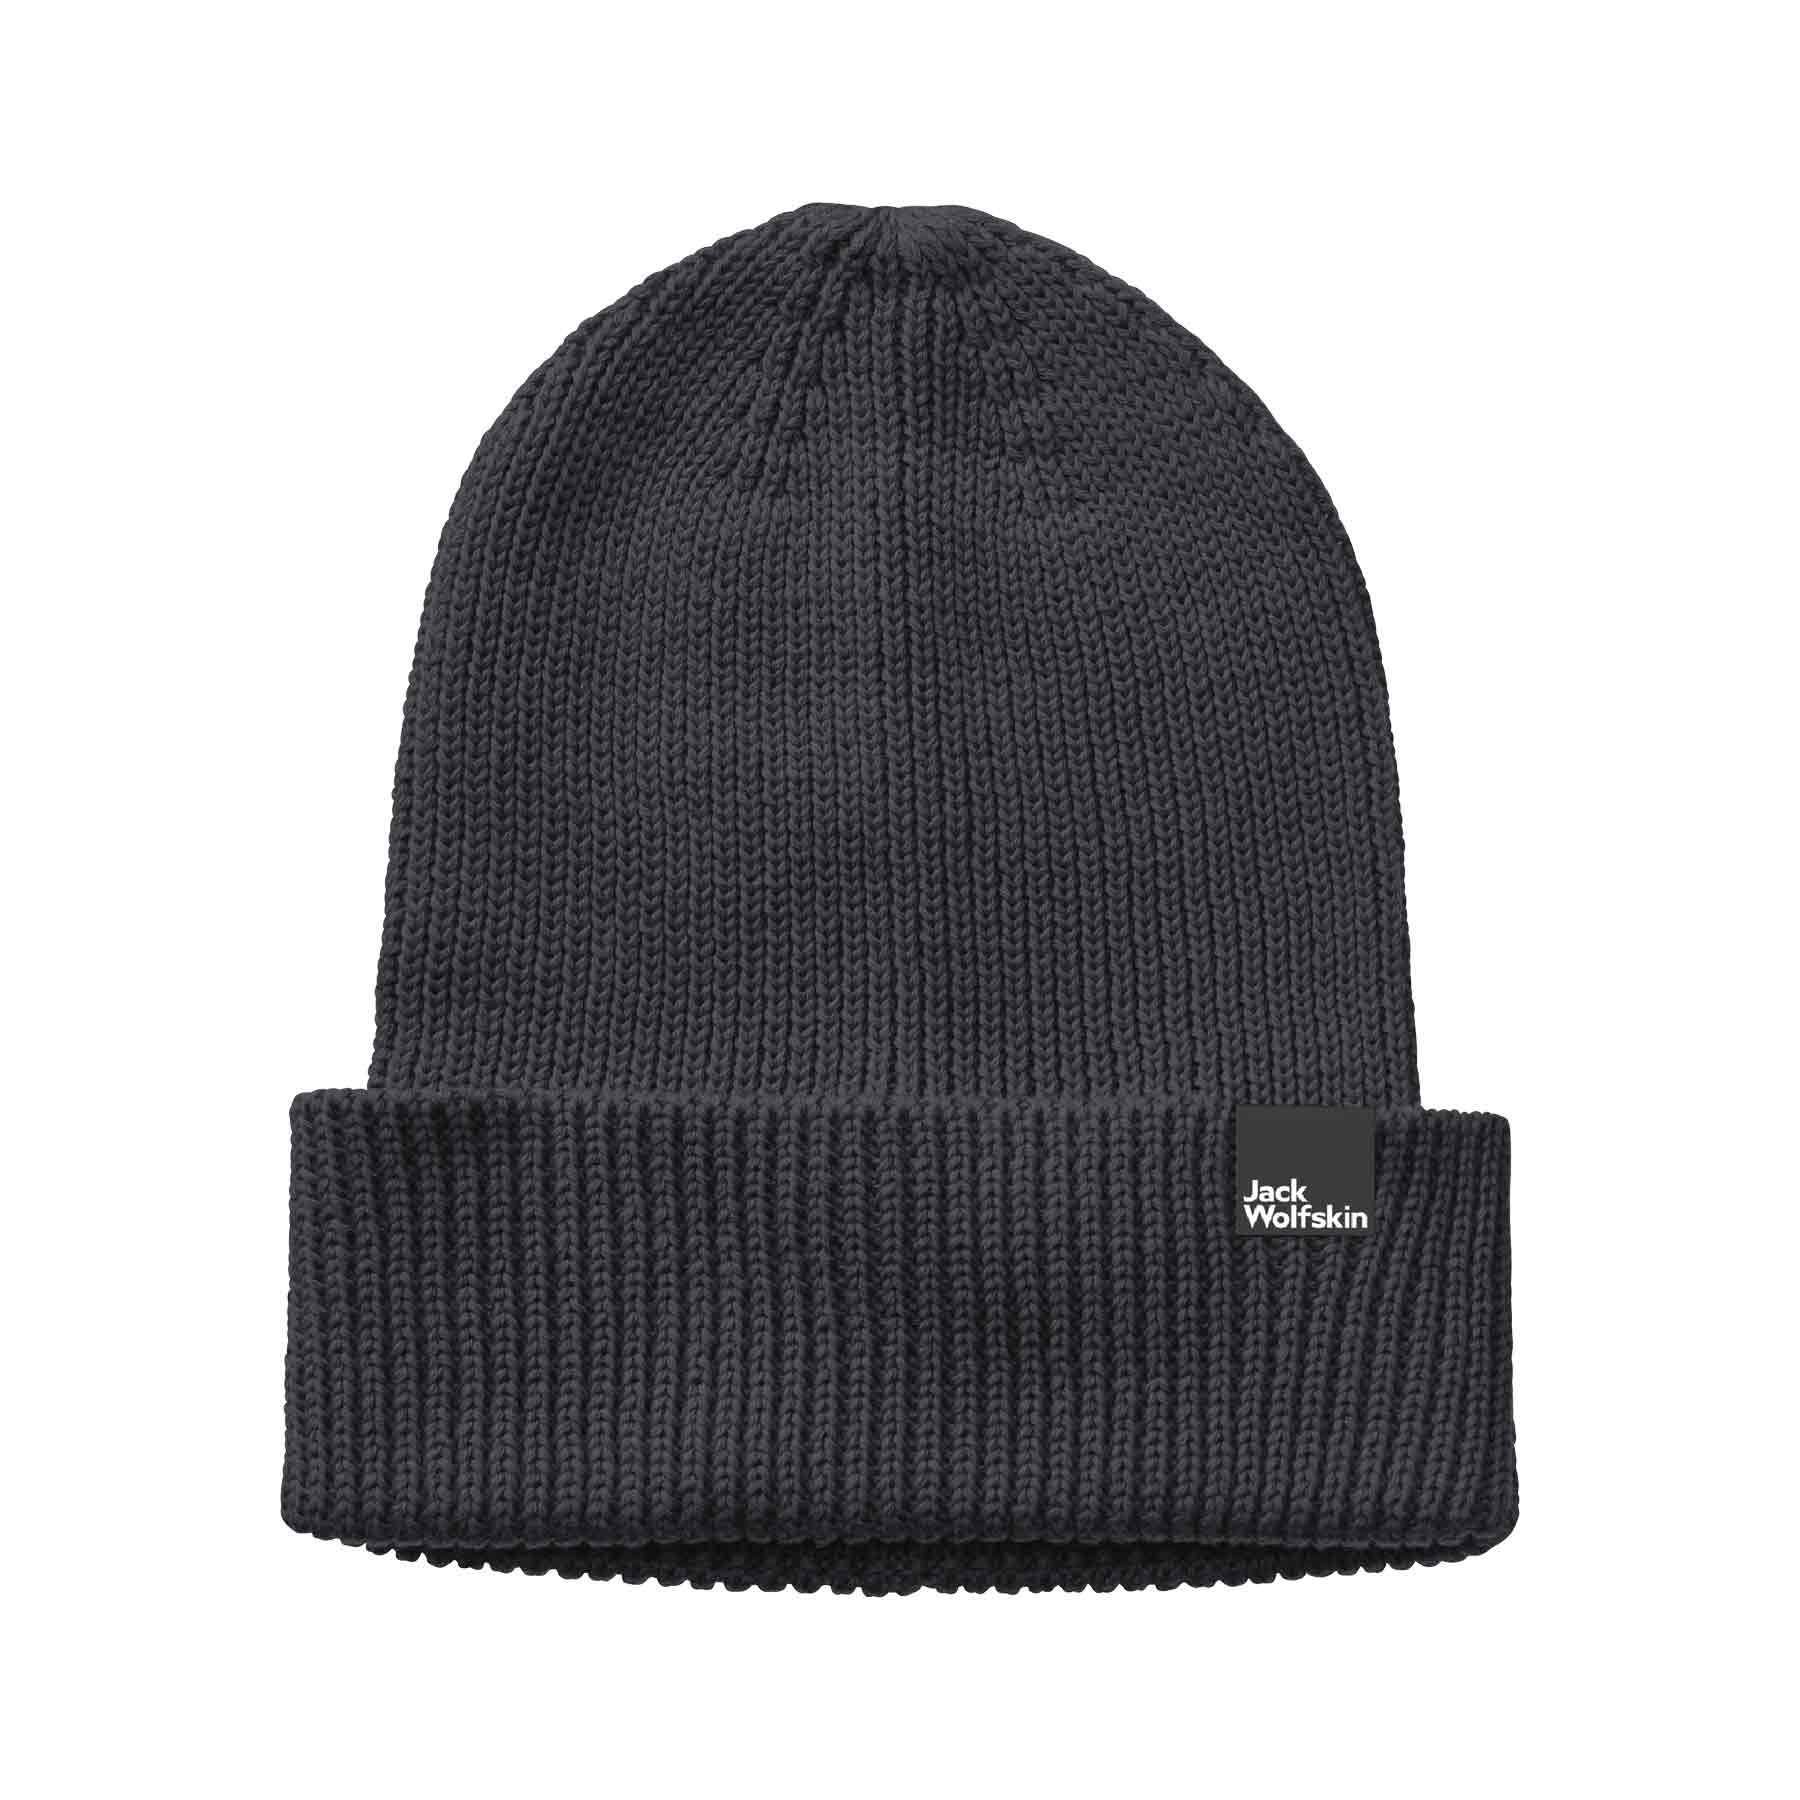 Essential Beanie by Jack Wolfskin - The Luxury Promotional Gifts Company Limited